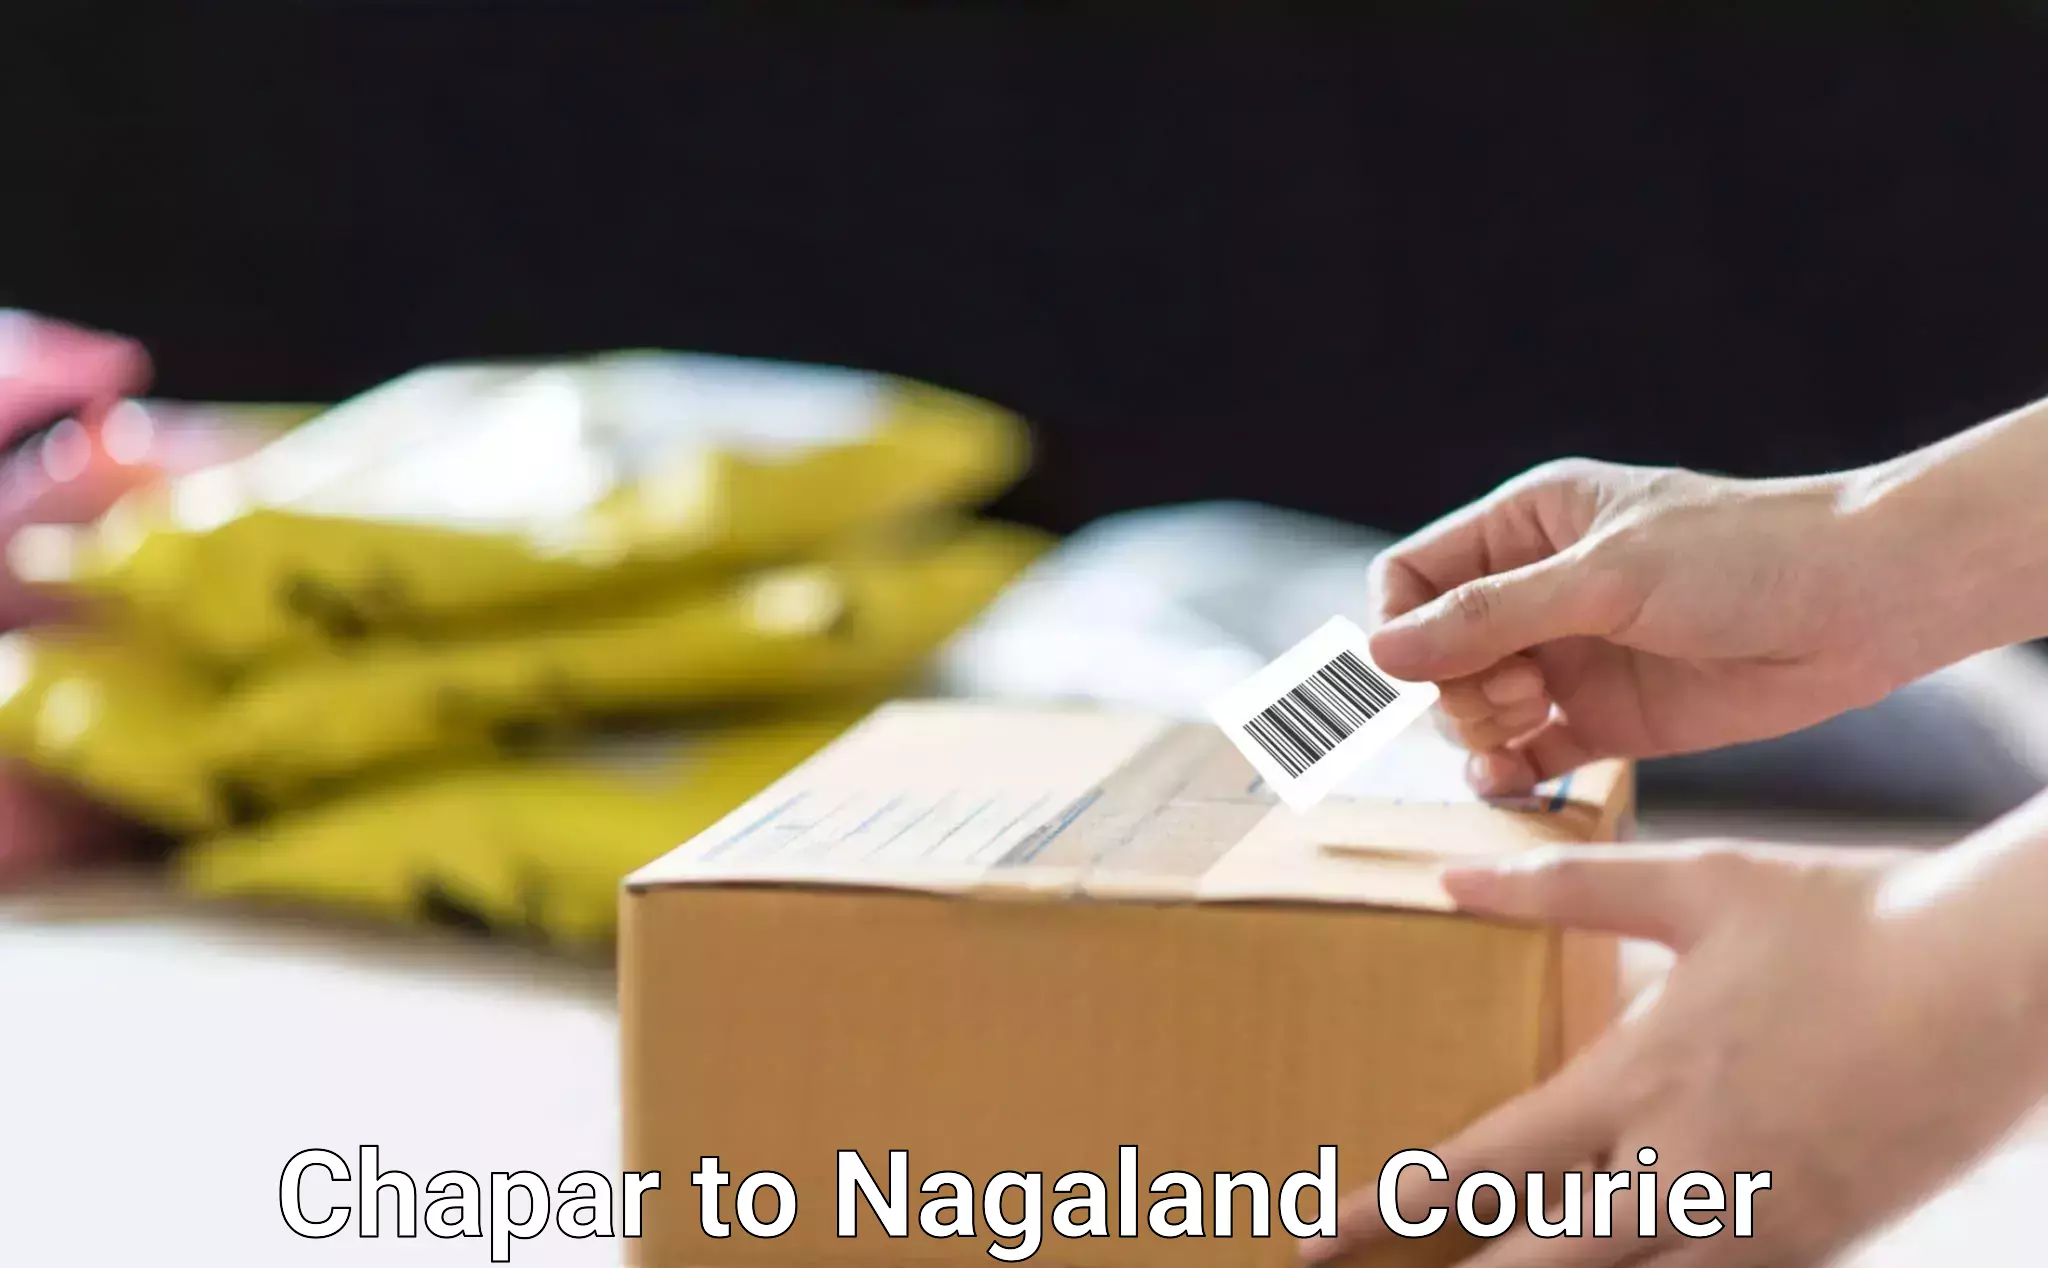 Fast delivery service Chapar to NIT Nagaland